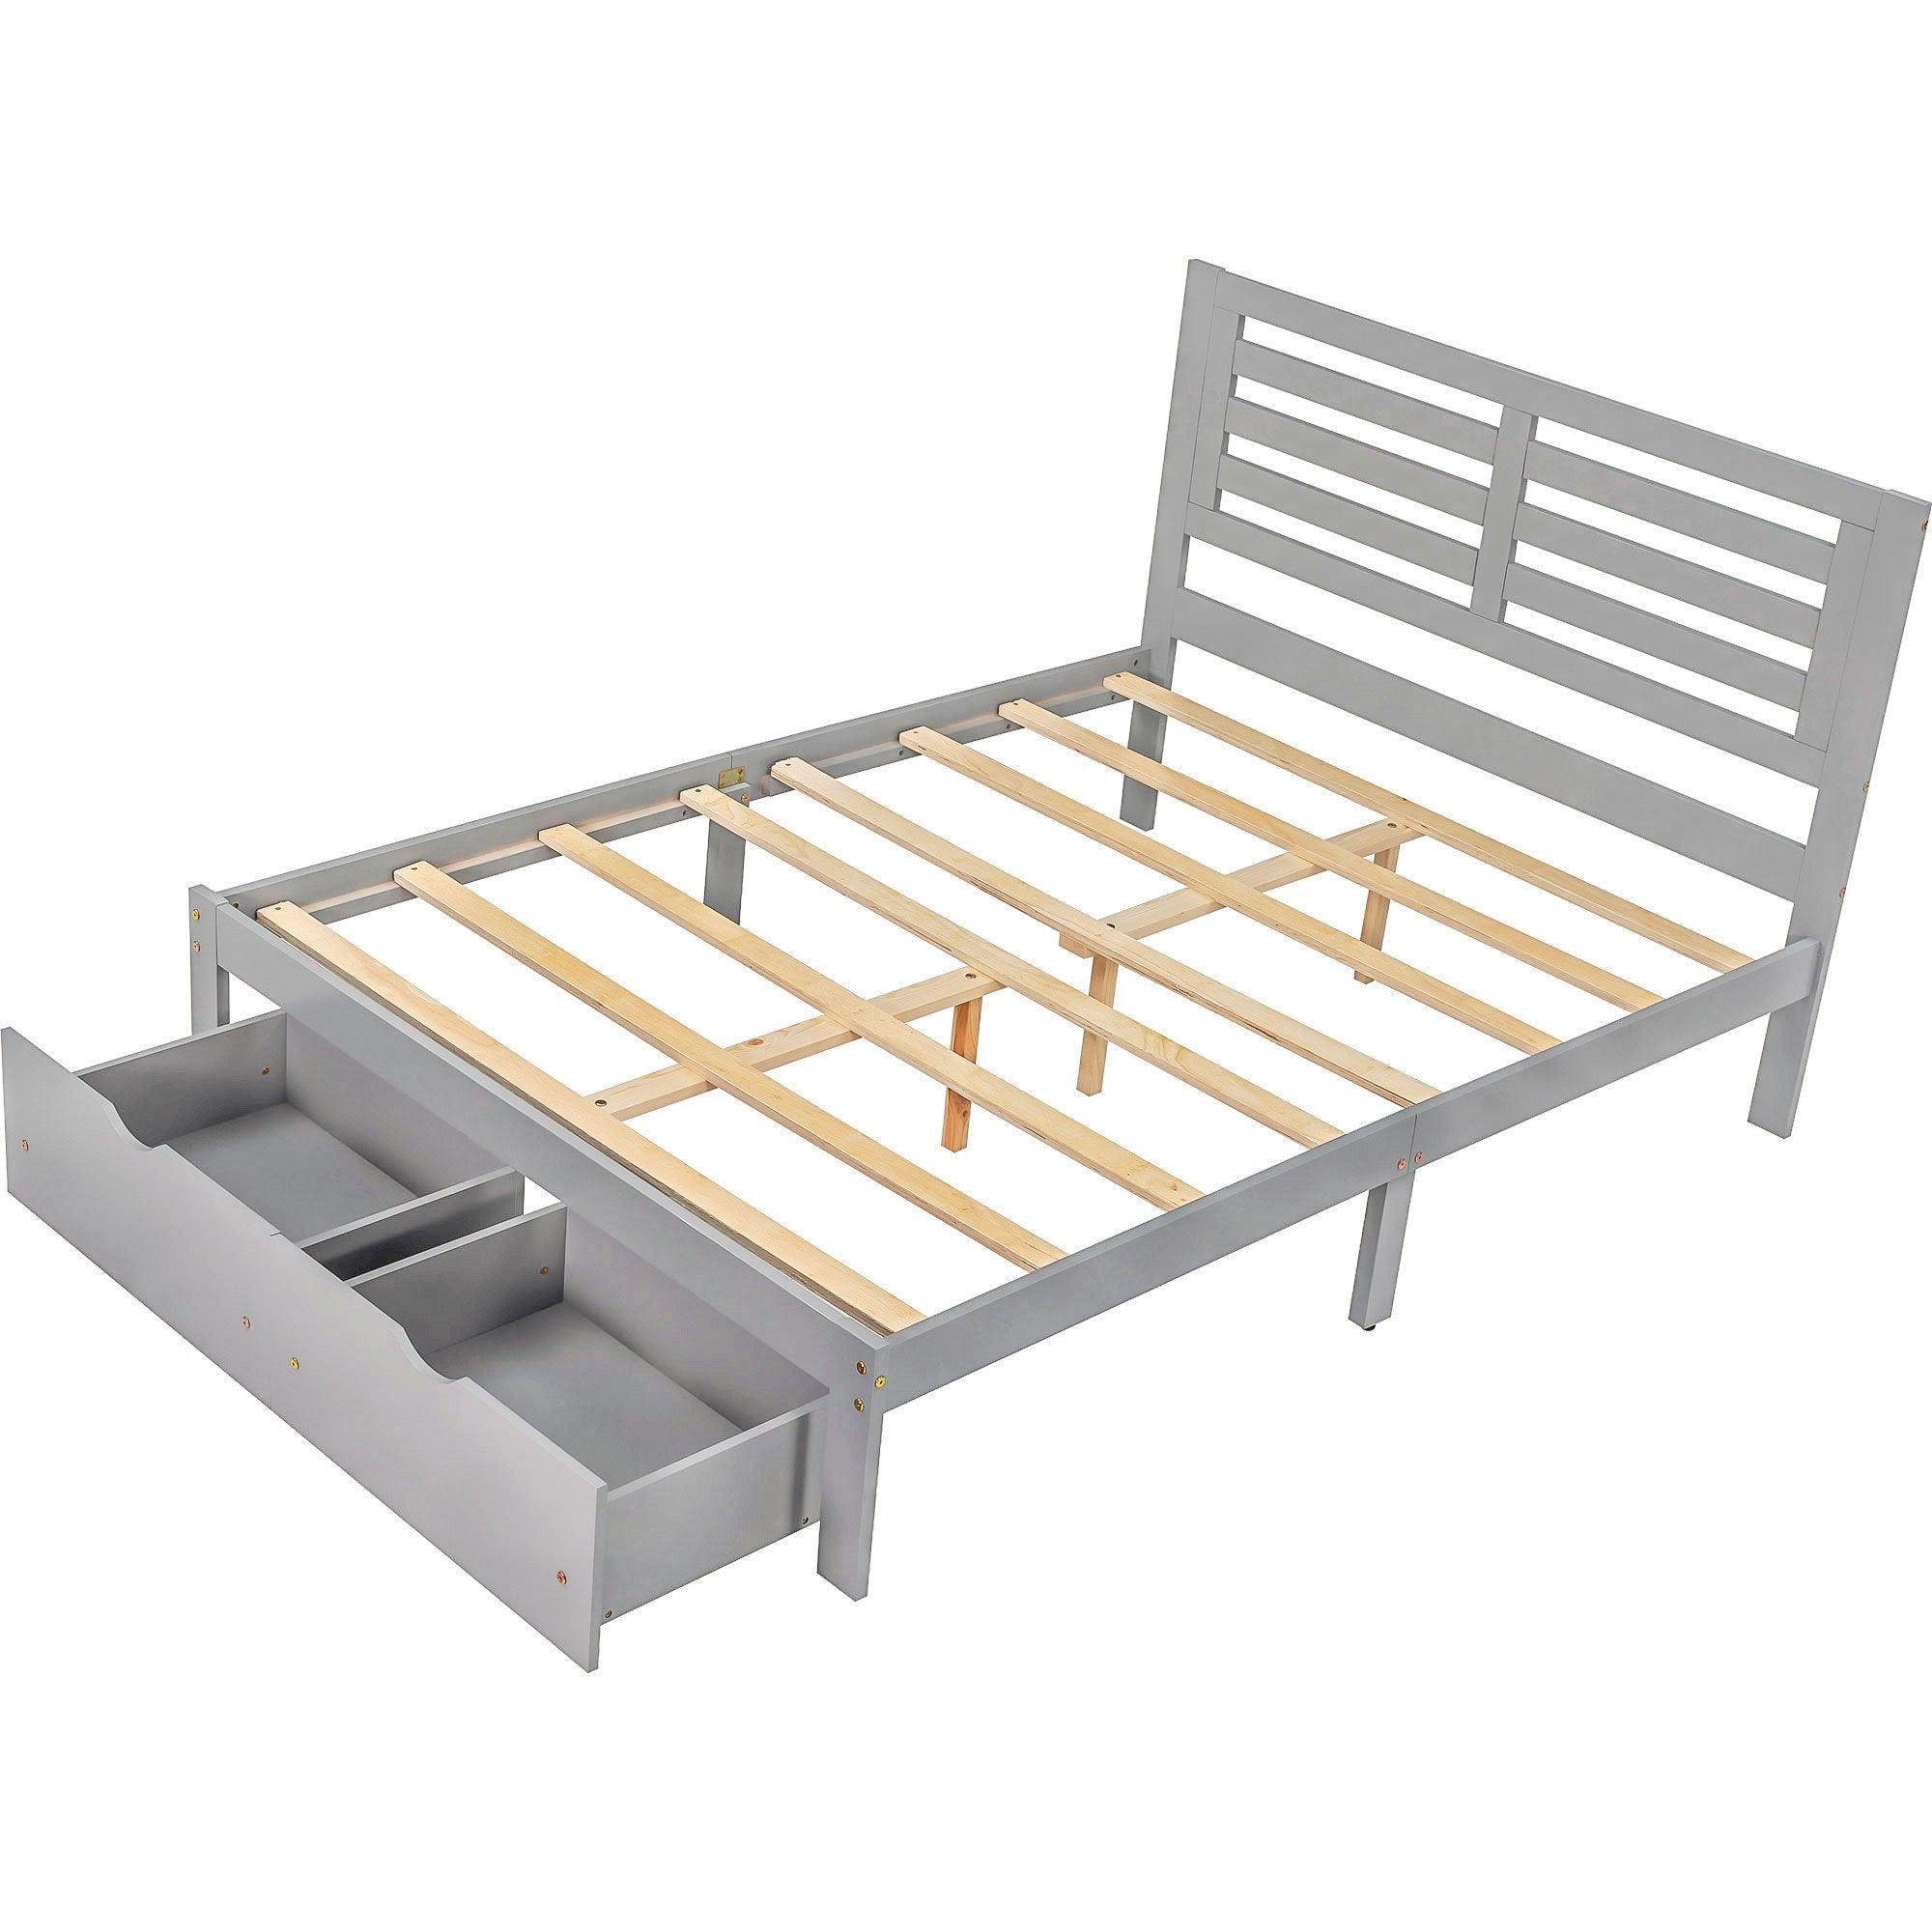 Full Size Platform Bed With 2 Drawers, Gray